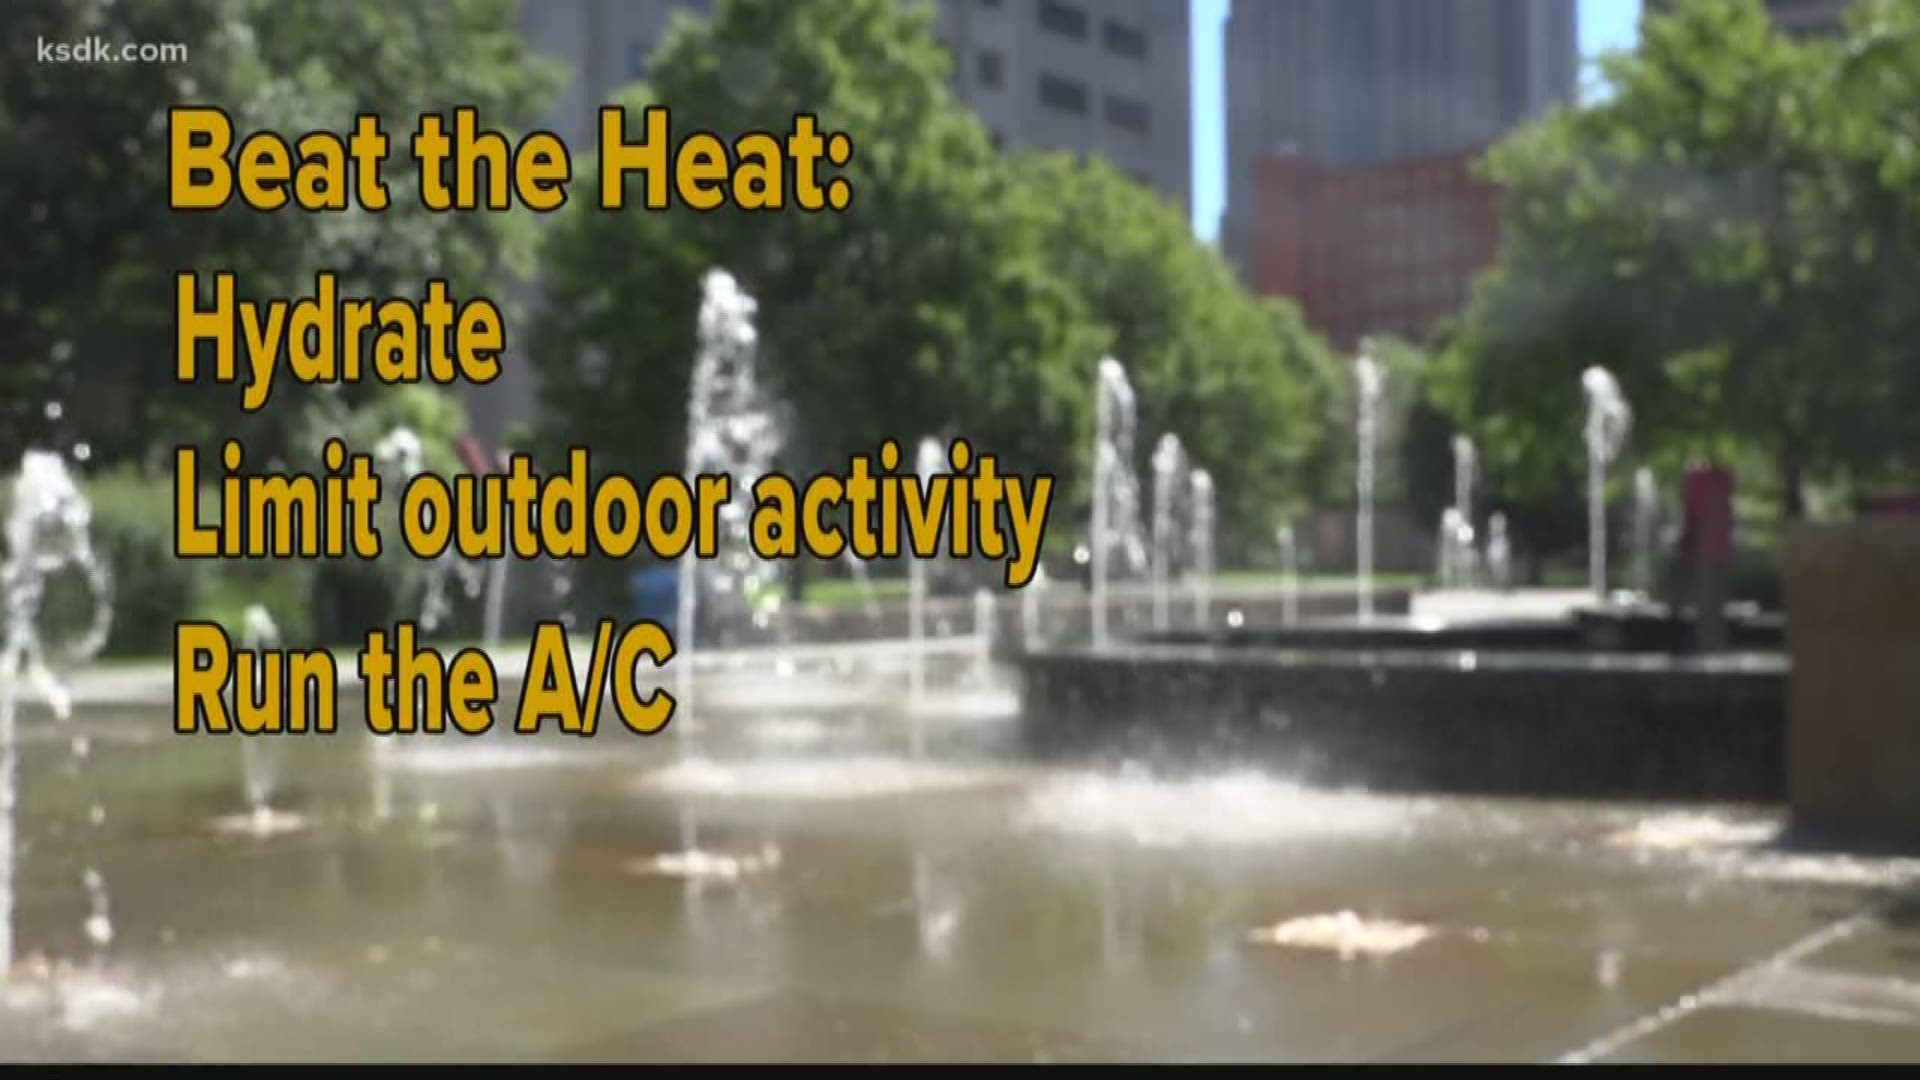 How to beat the St. Louis heat